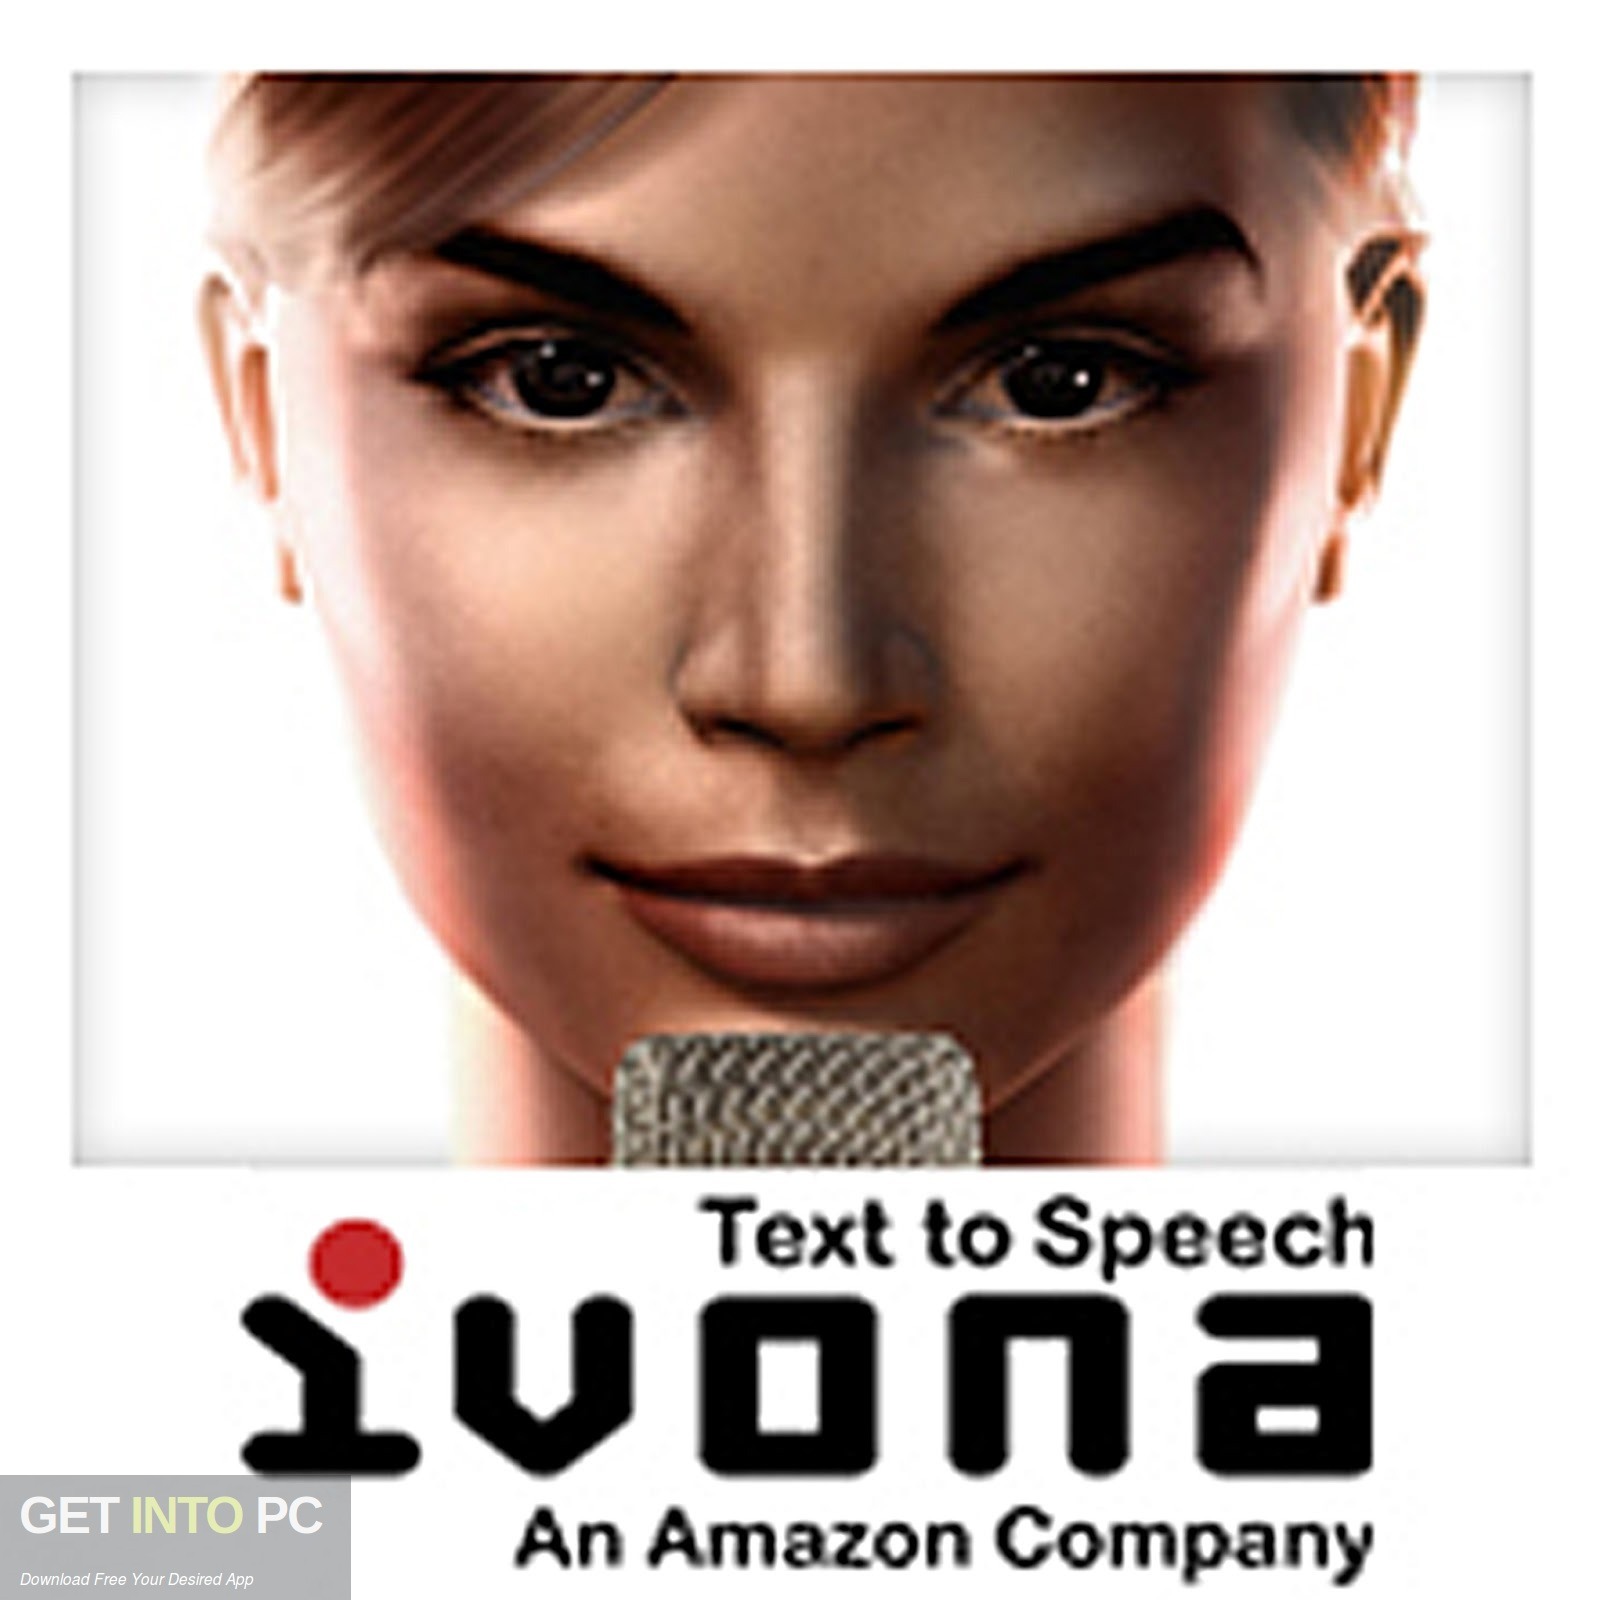 IVONA Text to Speech 1.6.63 with crack (All voices)